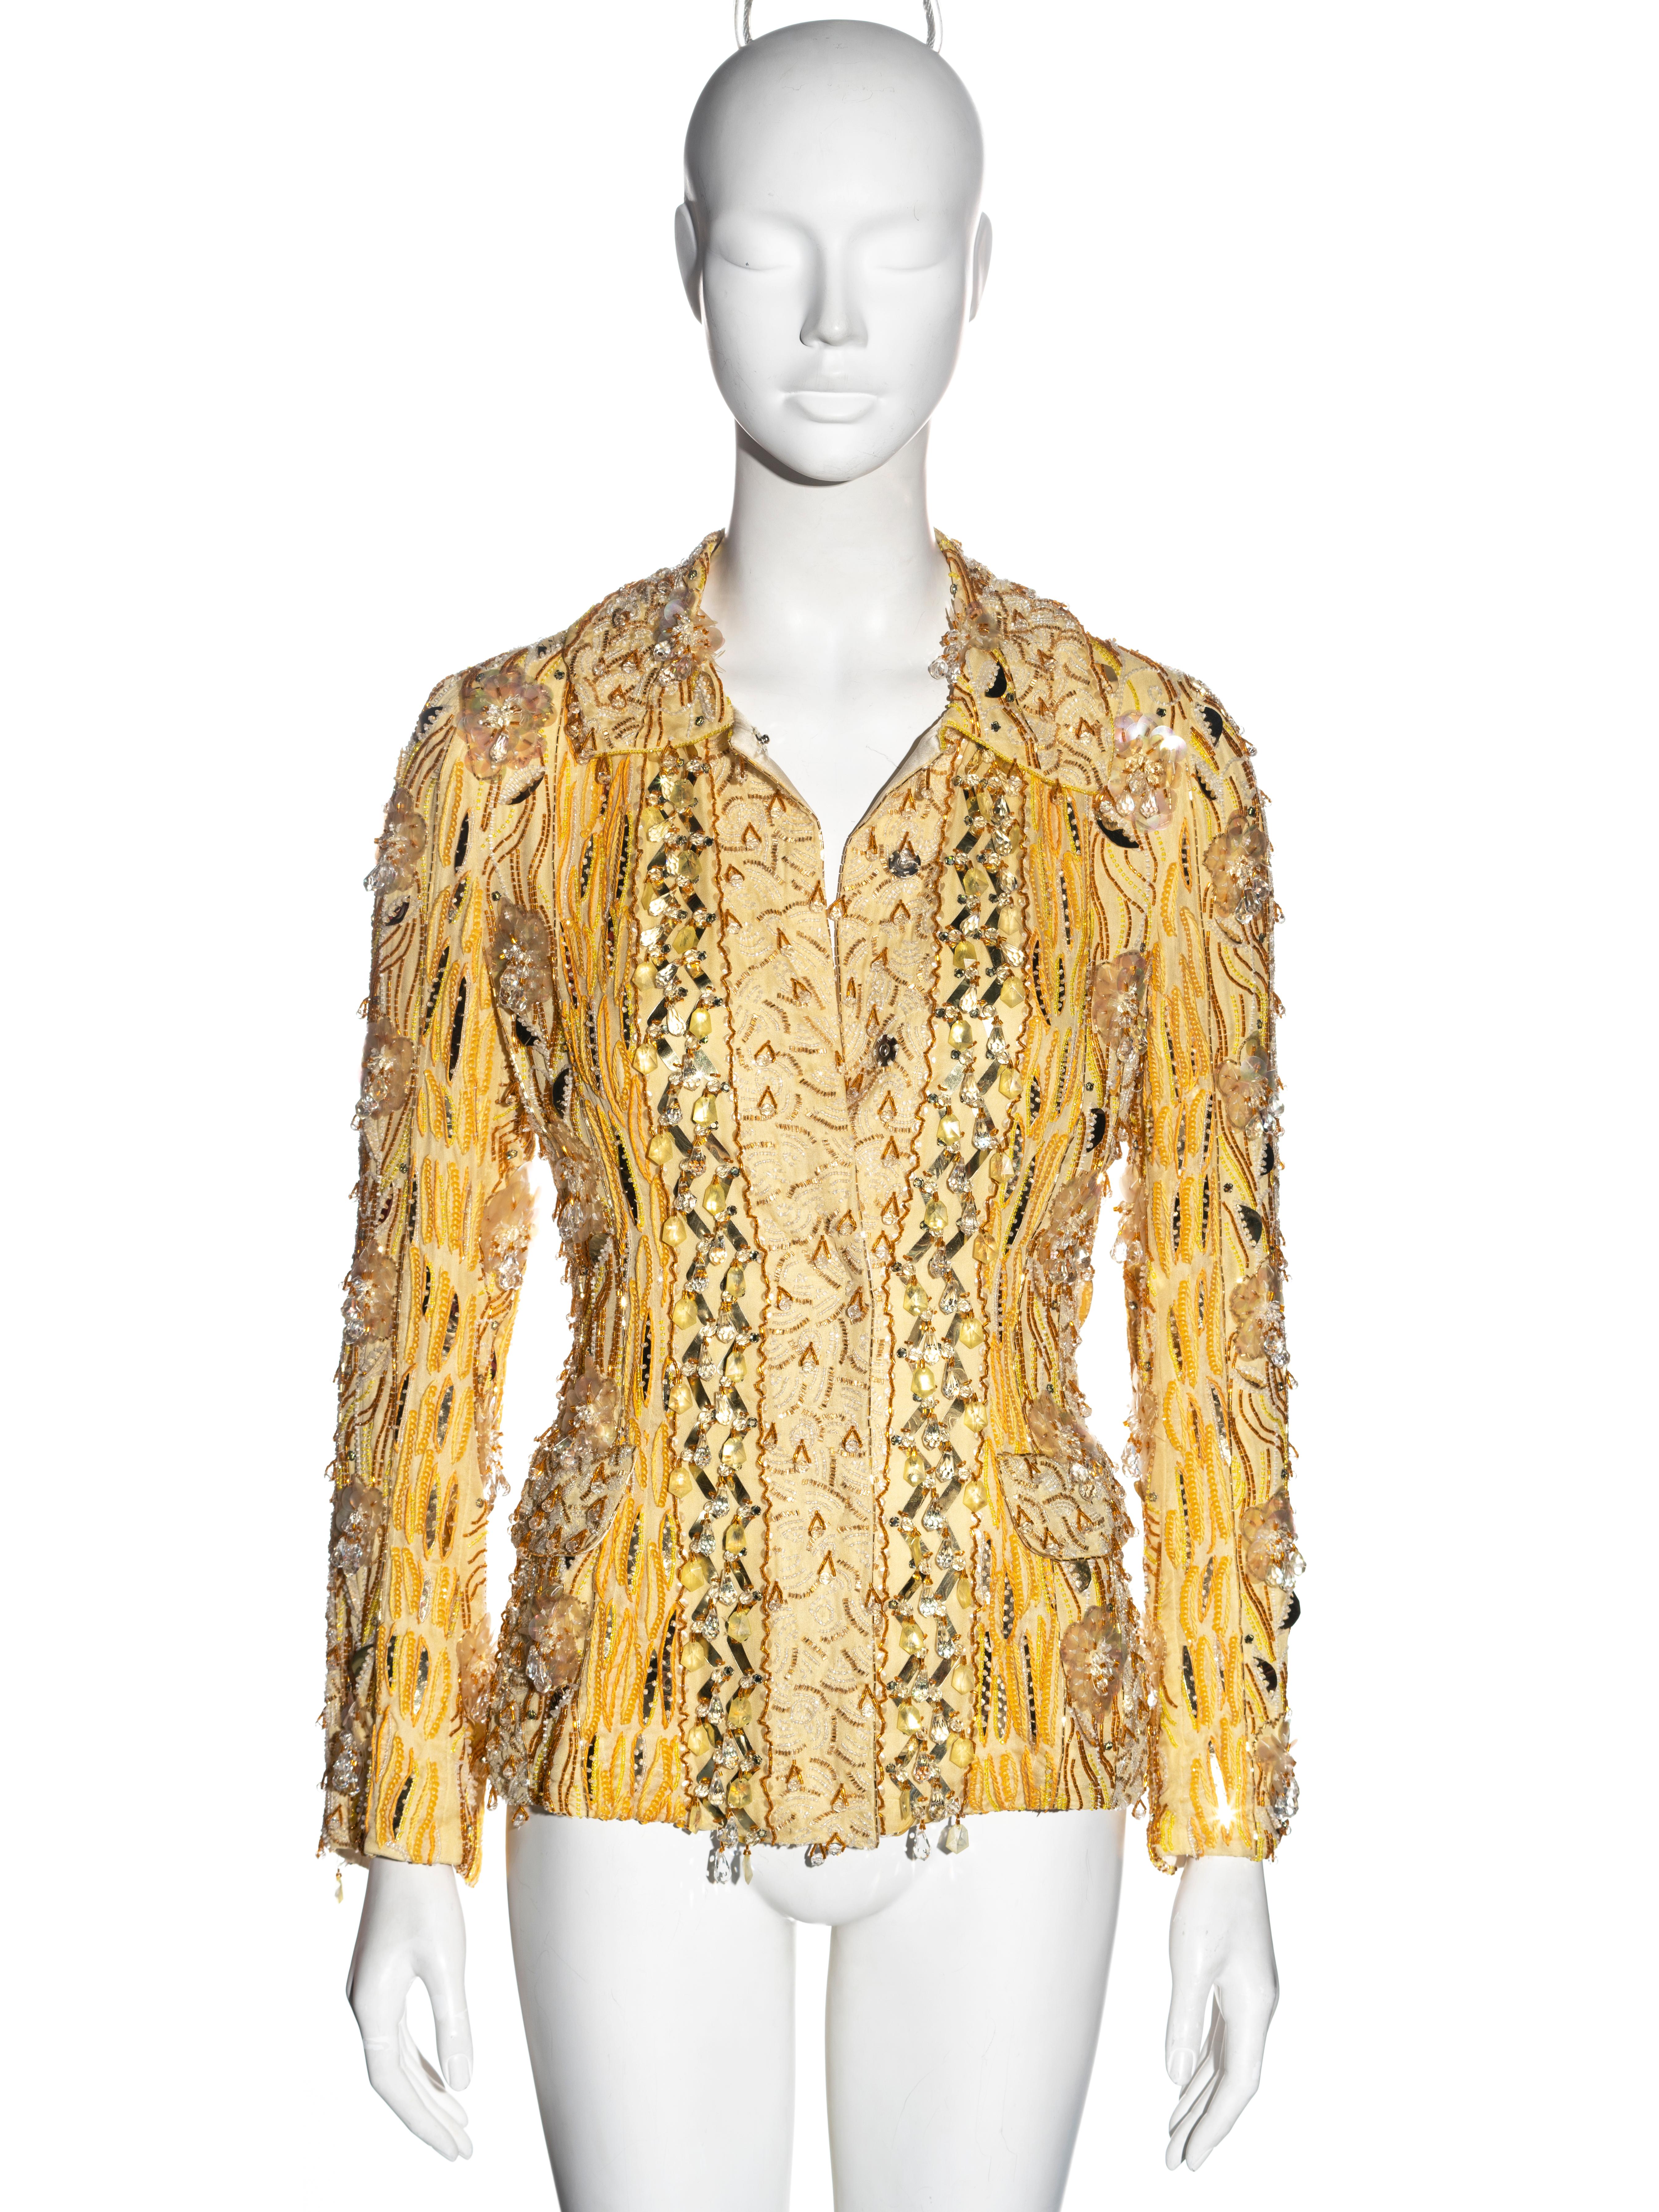 ▪ Dolce & Gabbana yellow primrose silk evening jacket 
▪ Heavily embellished with crystals, sequins, beads and pendants
▪ Snap button closures 
▪ Two front flap pockets 
▪ Labelled by the brand as a 'Special Piece'
▪ IT 42 - FR 38 - UK 10 - US 6
▪